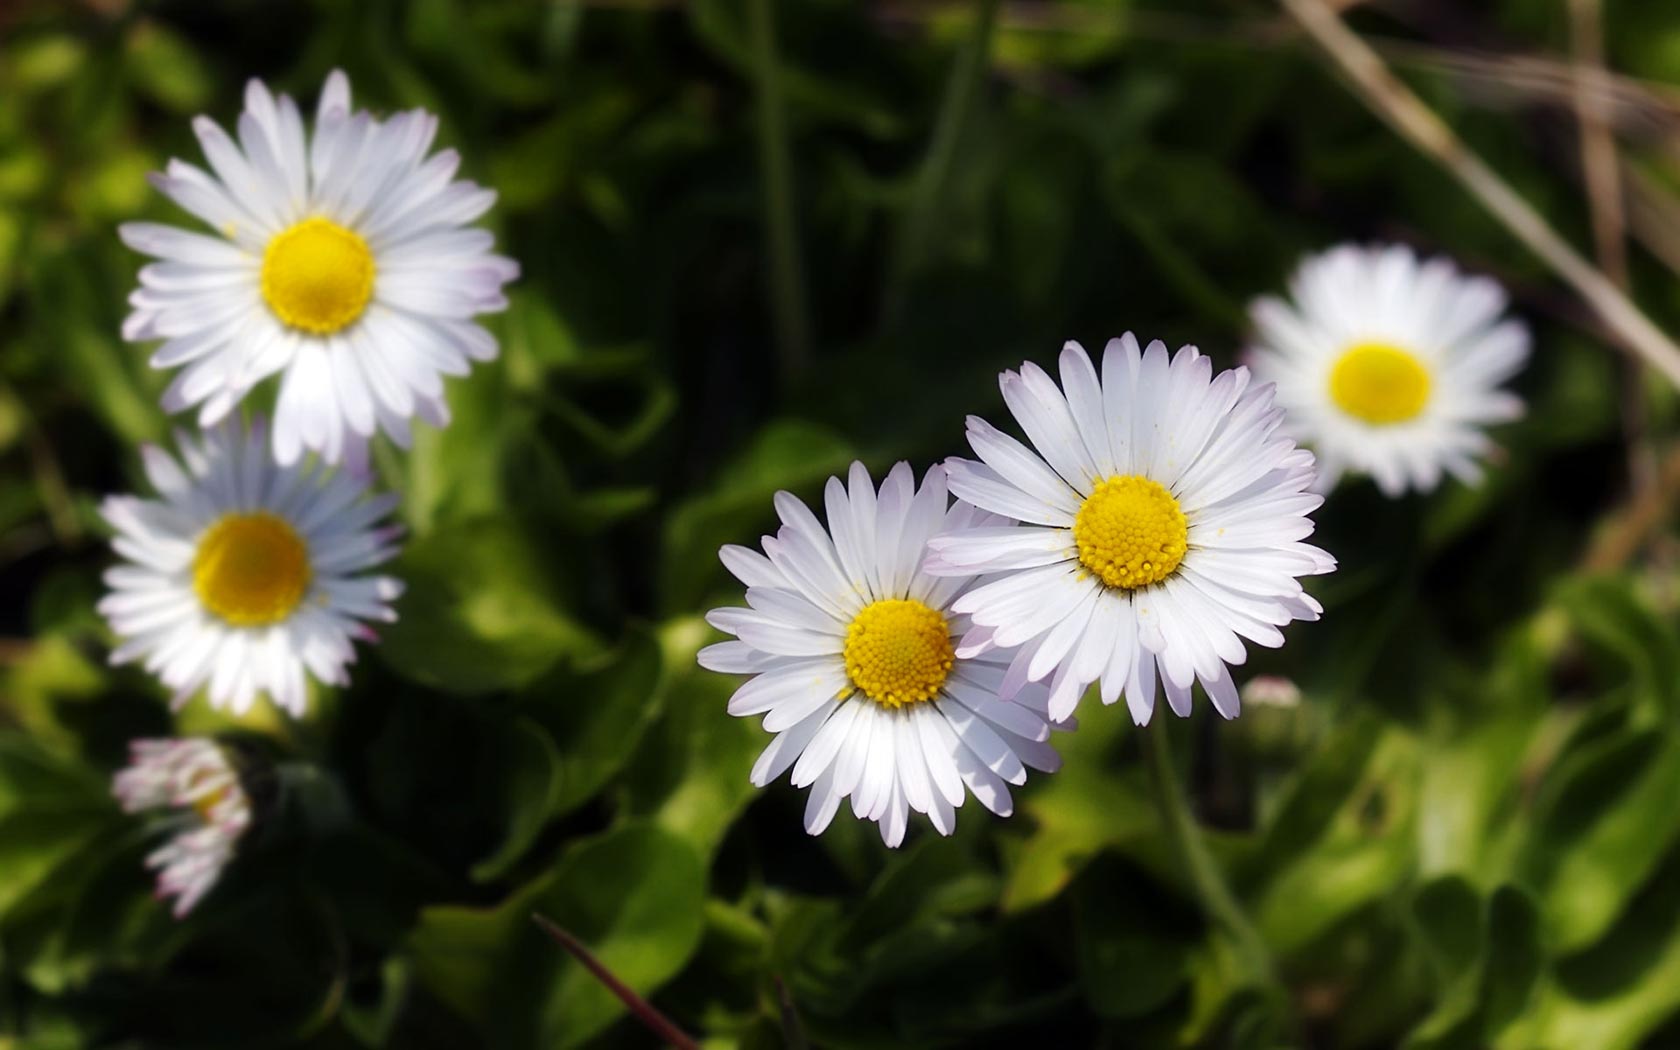 Desktop Background Of Daisies In A Grassy Meadow